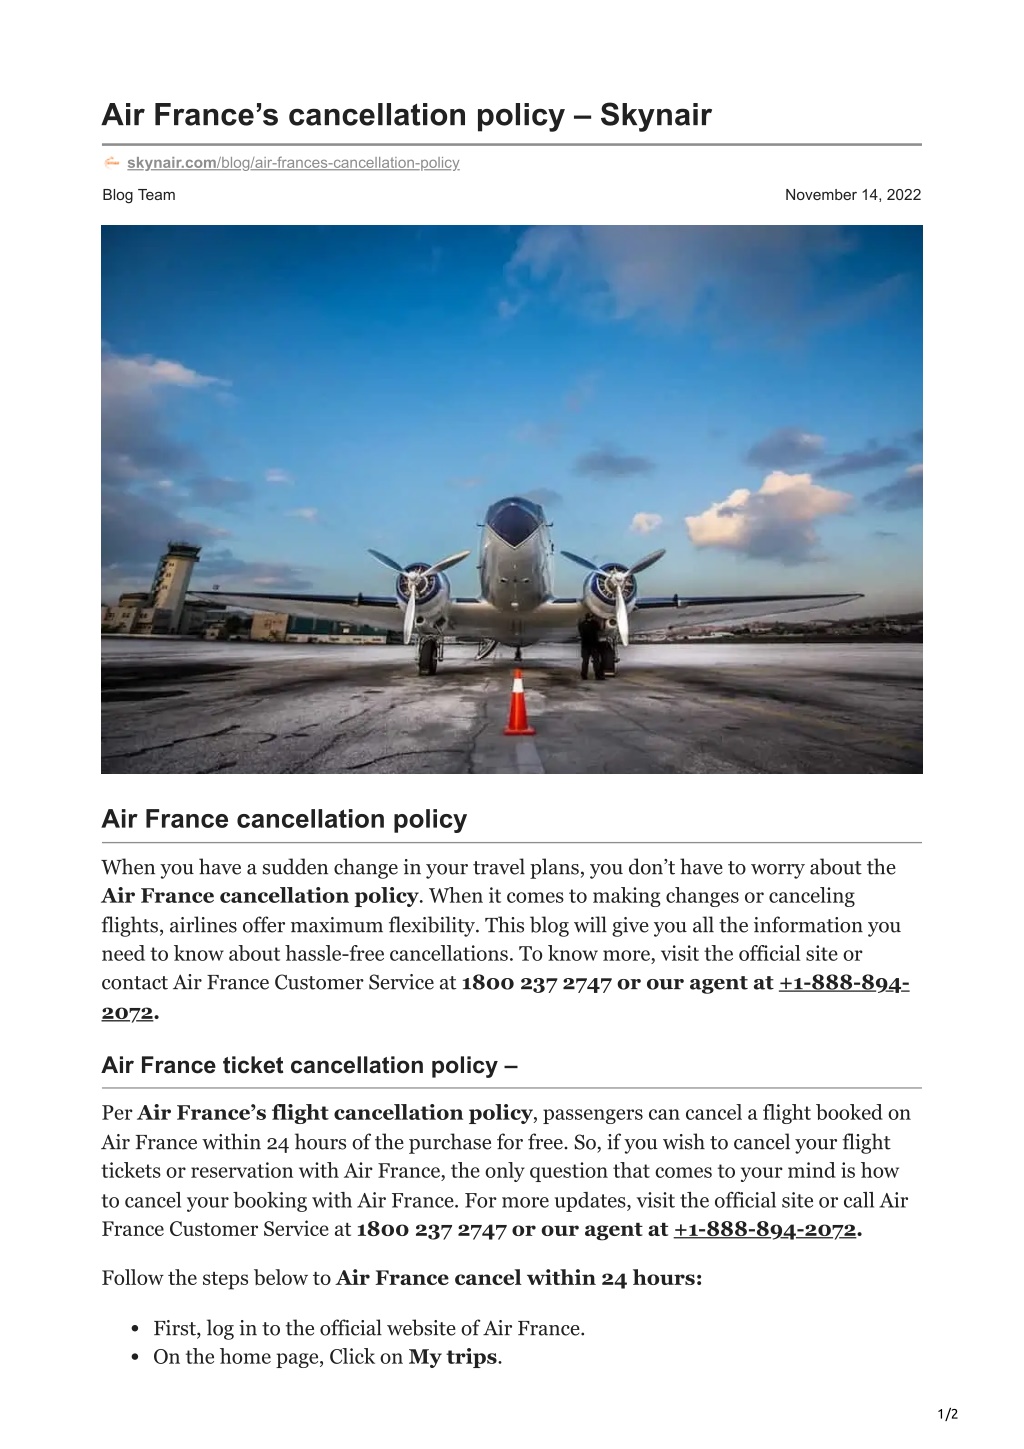 PPT Air France’s cancellation policy PowerPoint Presentation, free